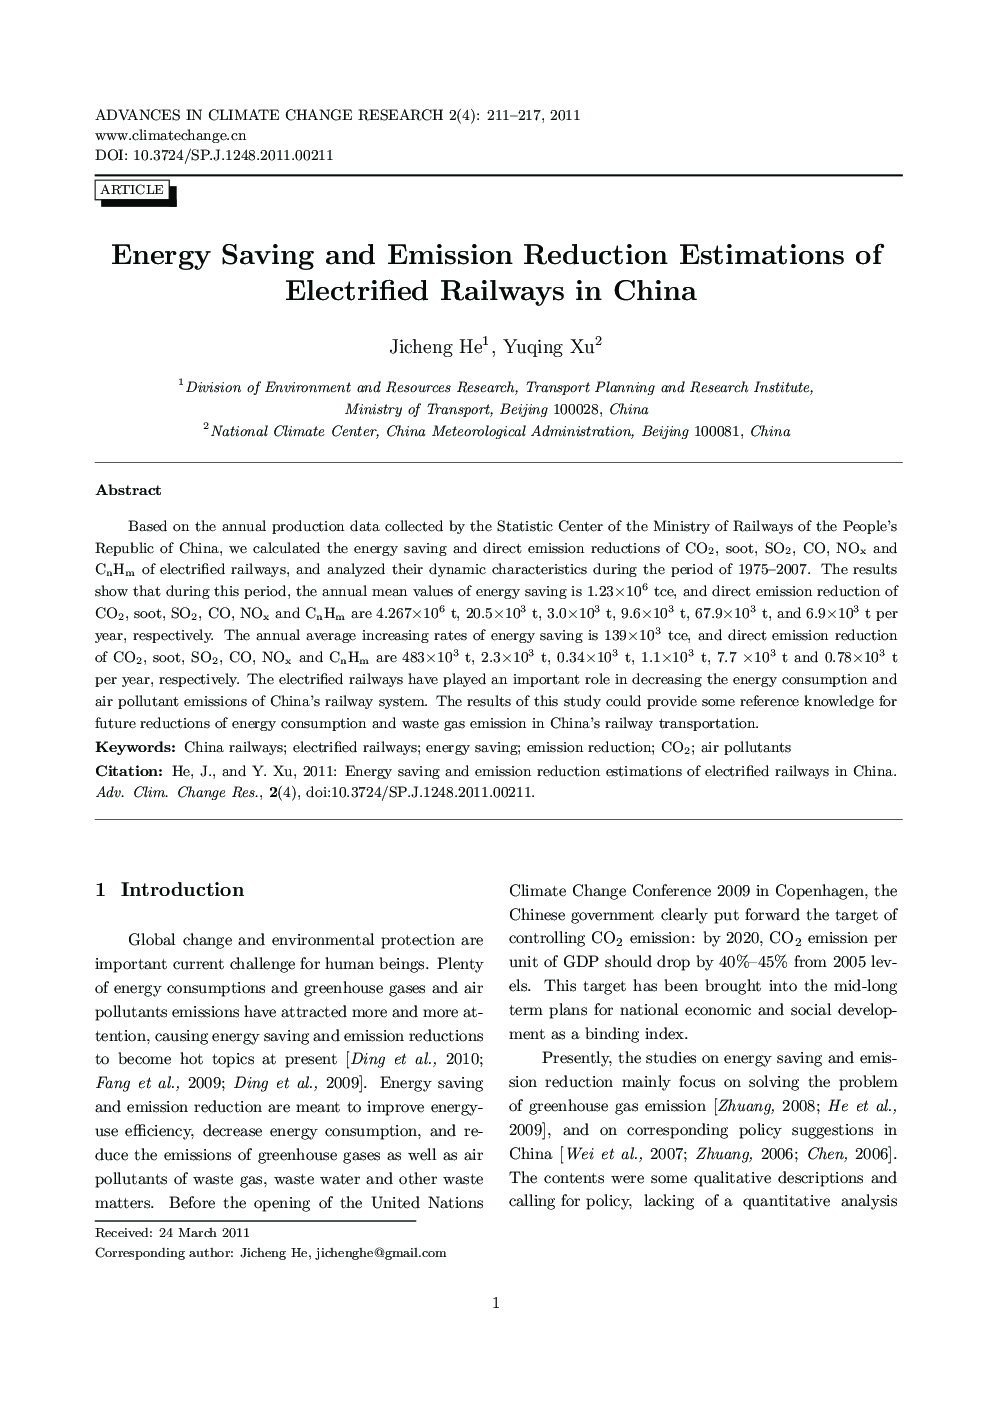 Energy Saving and Emission Reduction Estimations of Electrified Railways in China